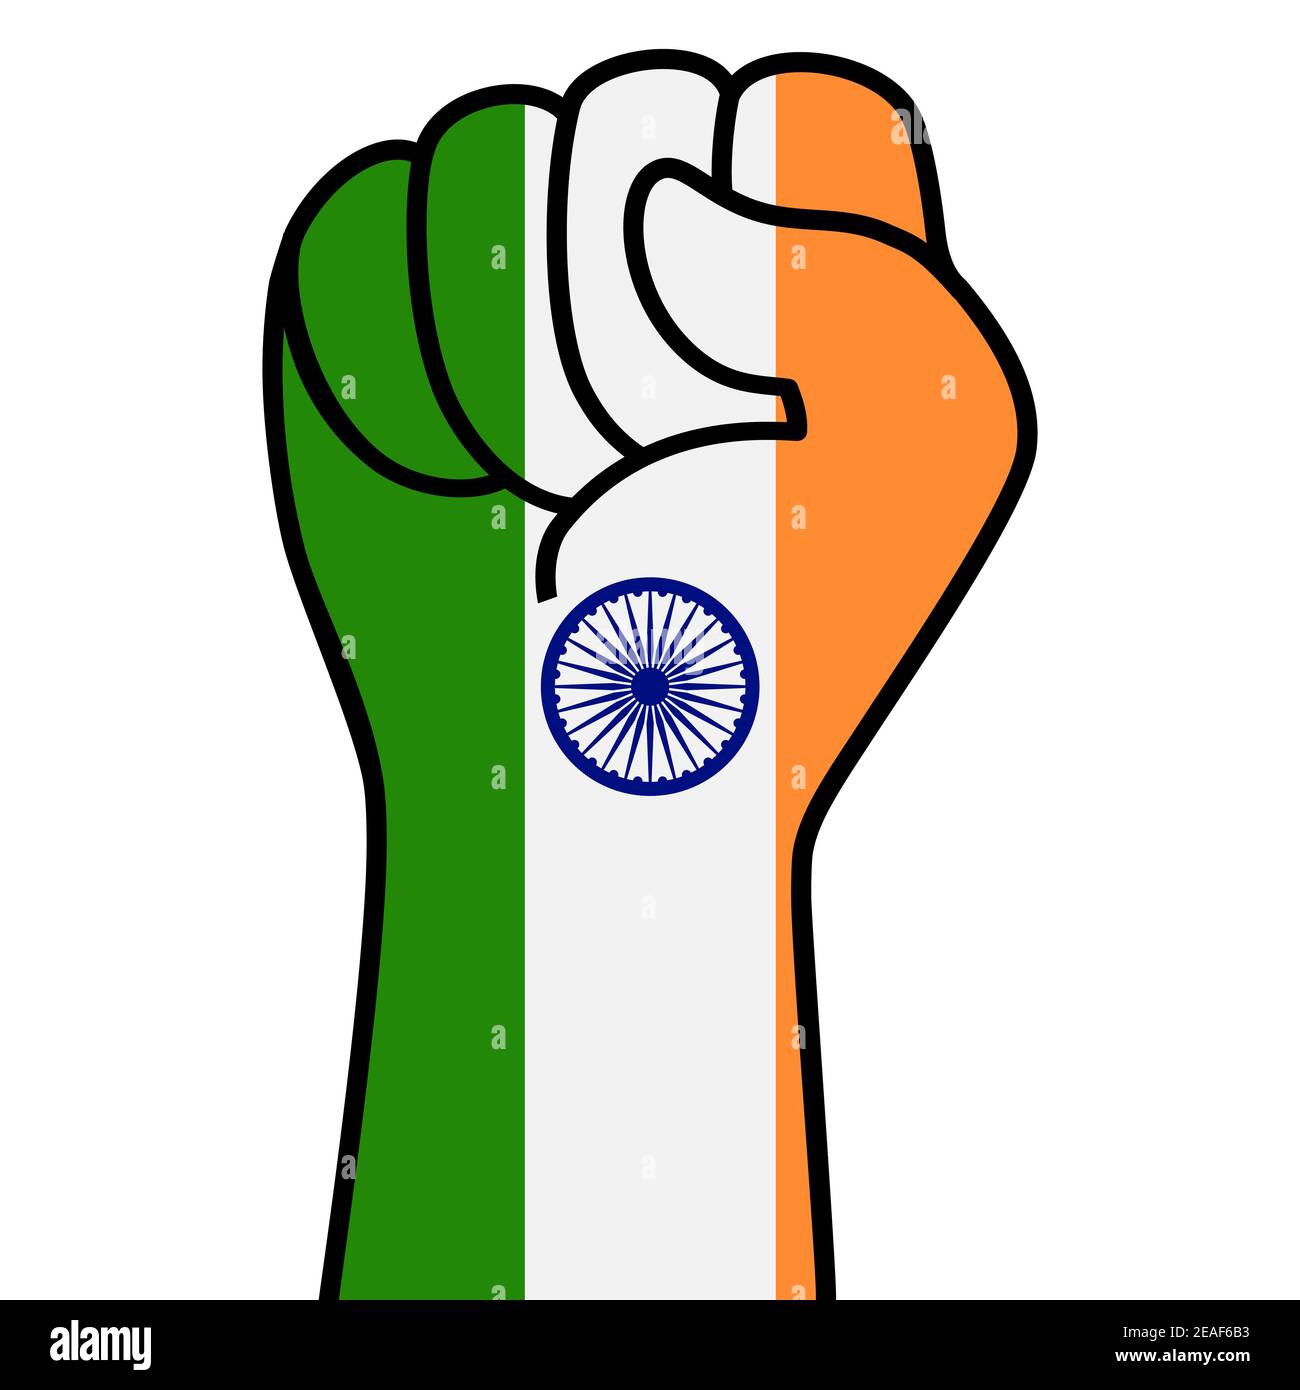 Raised indian fist flag. Indian hand. Fist shape india flag color. Patriotic demonstration, rebel, protest, fighting for human rights, freedom. Vector Stock Vector